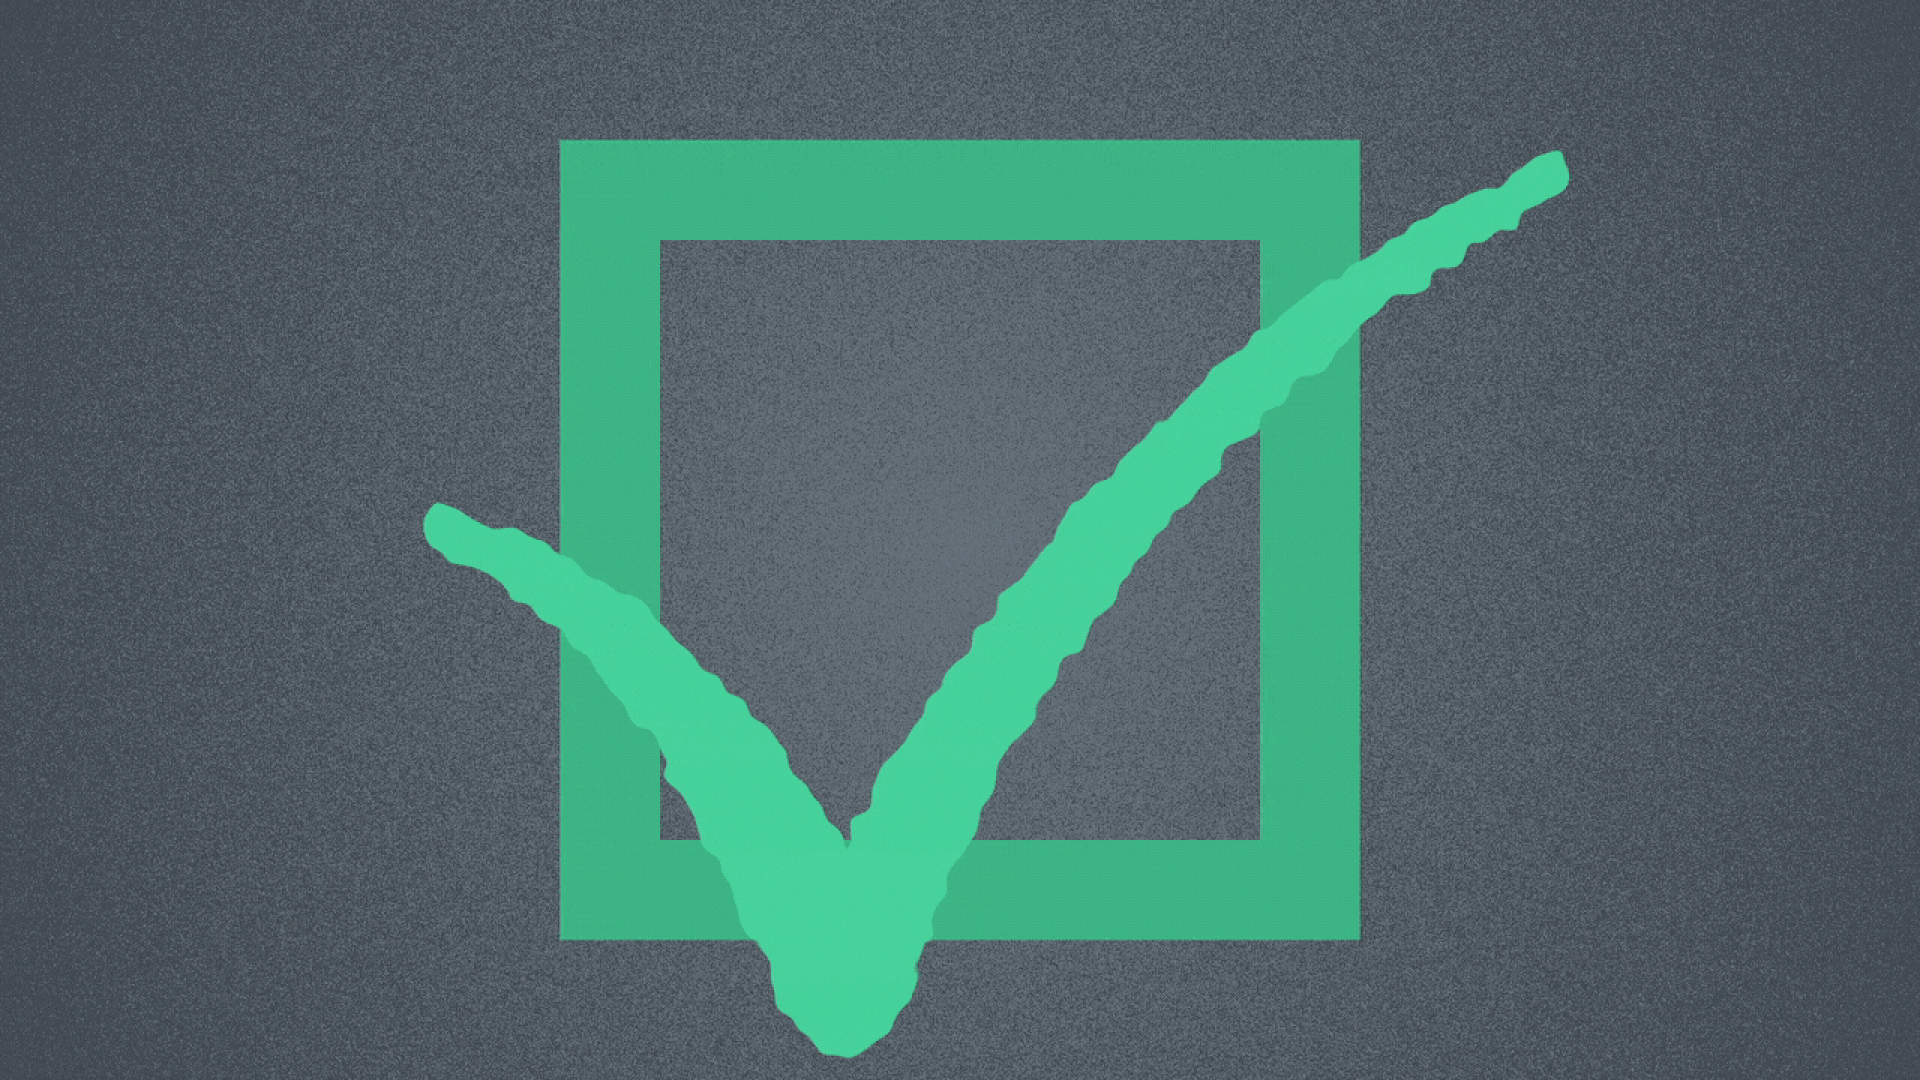 Illustration of a green checkmark turning into a green no symbol.